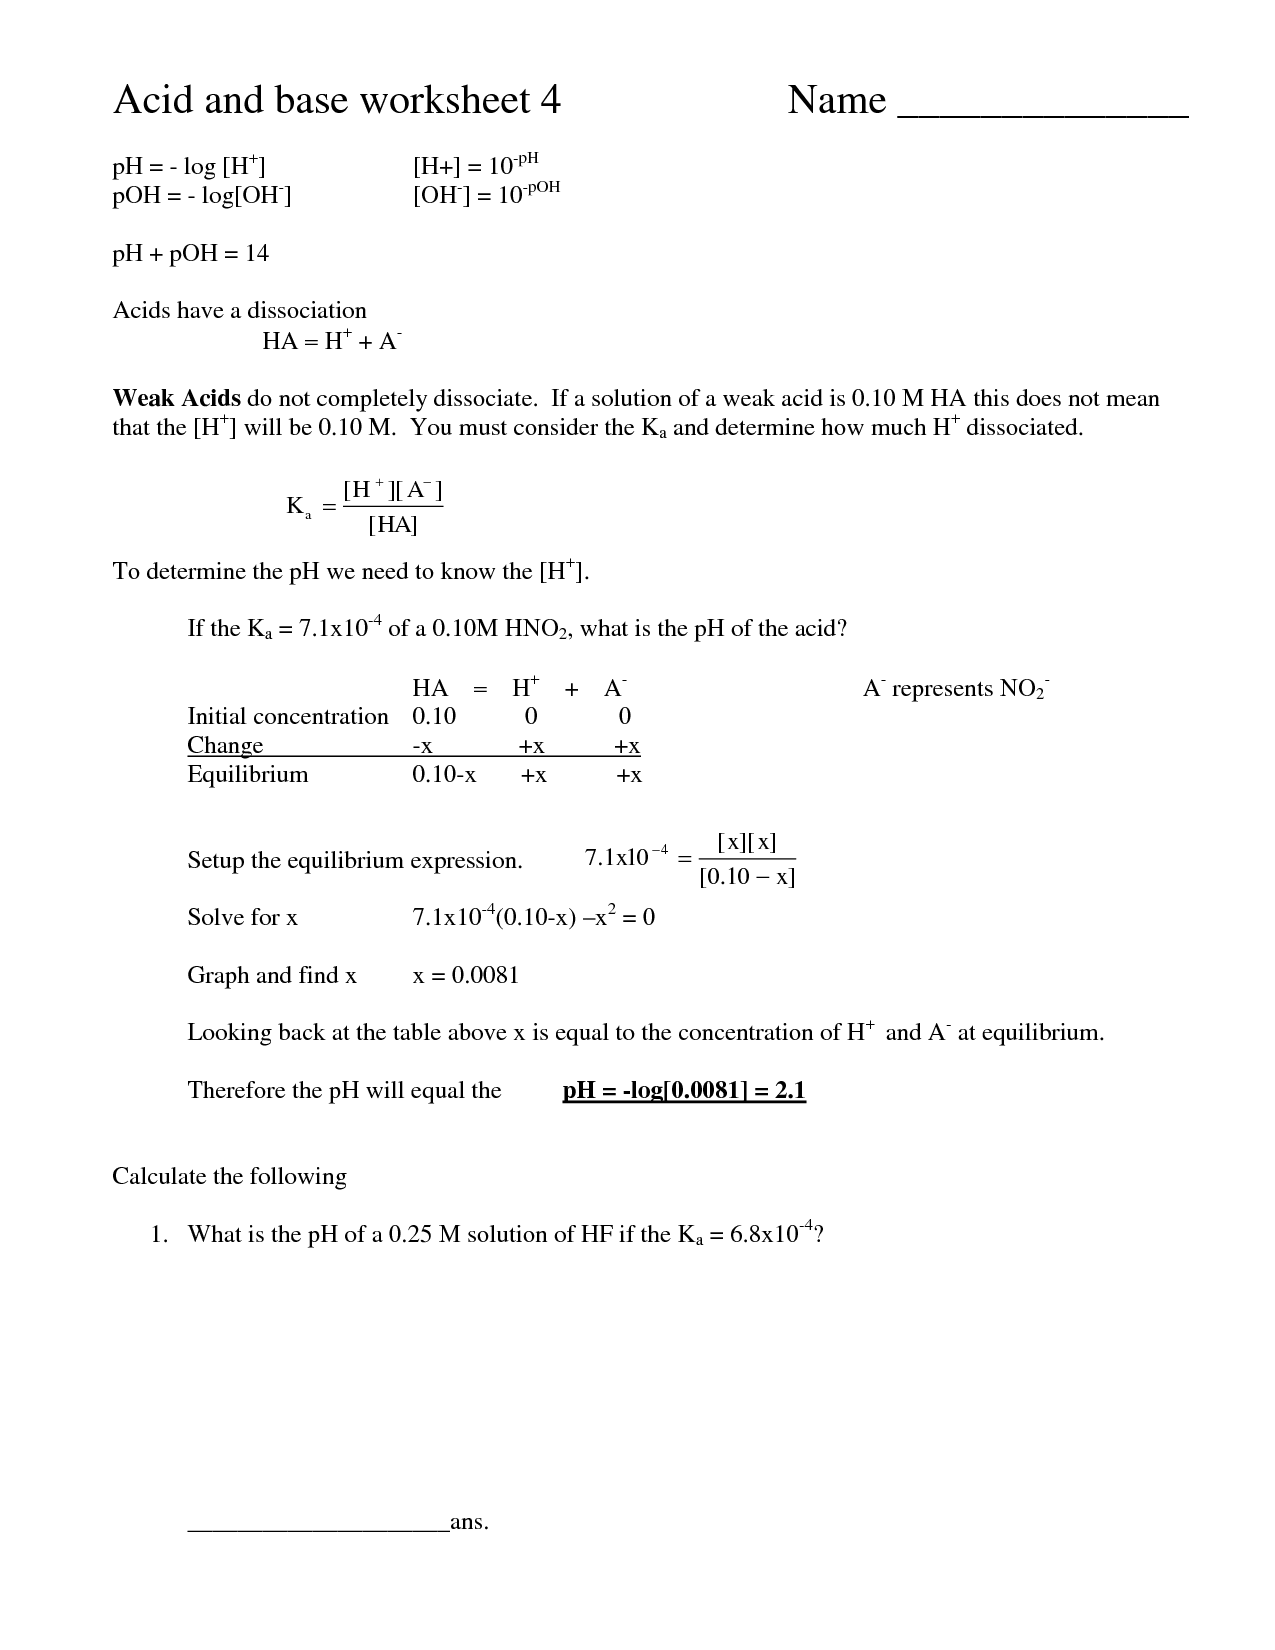 11-best-images-of-acid-and-base-reactions-worksheet-acids-and-bases-worksheet-answers-acids